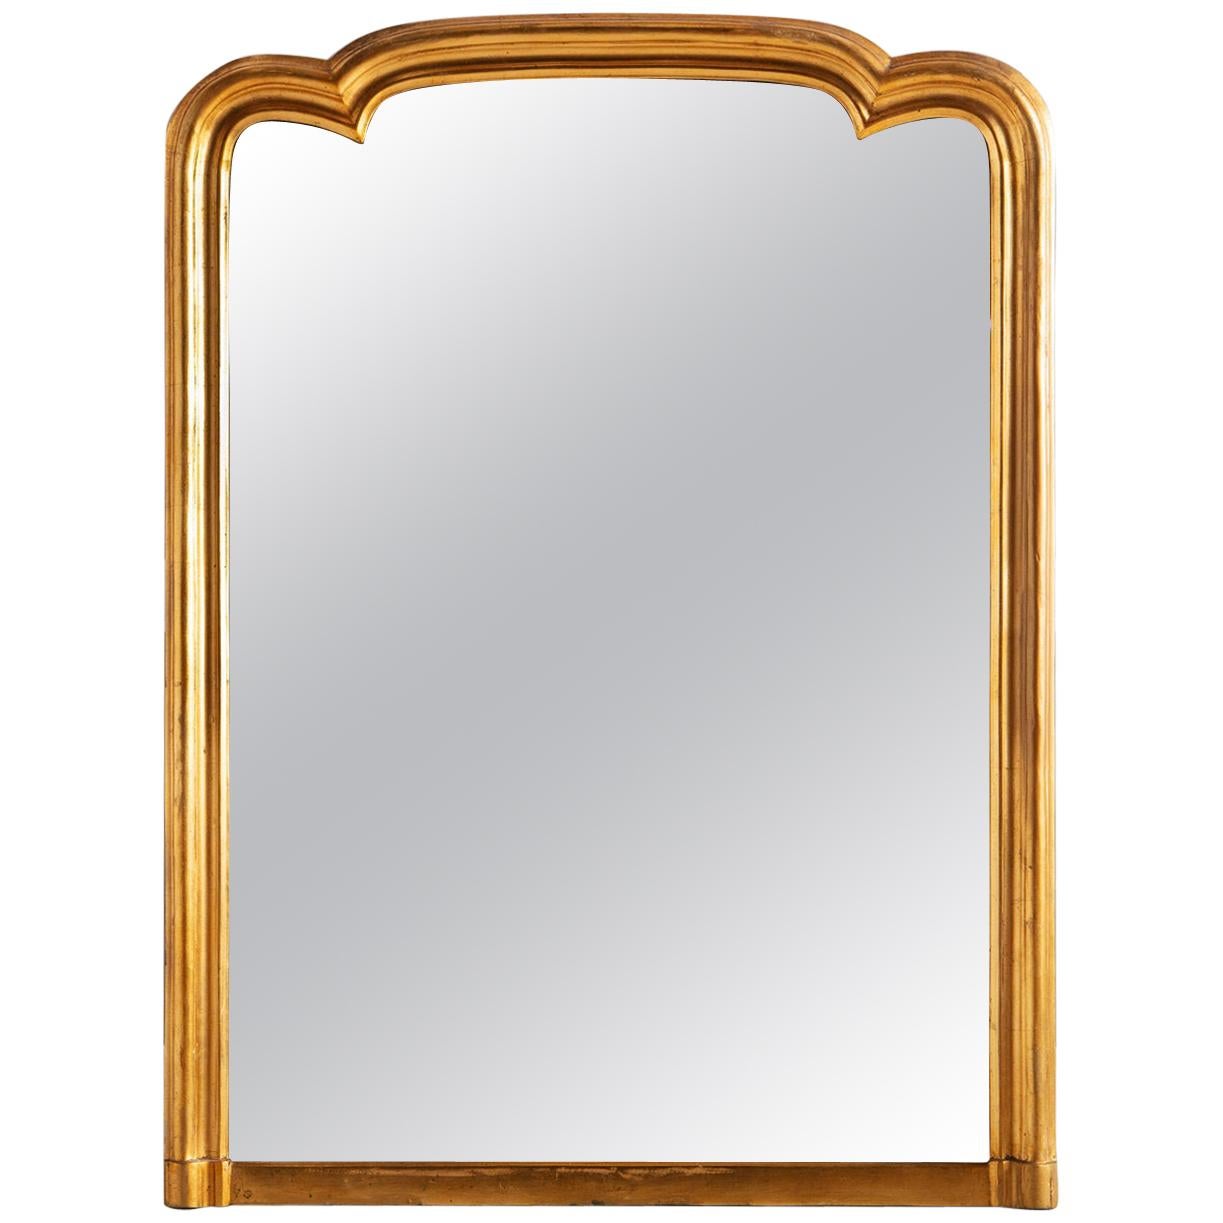 Large Mirror with Unique Arched Top